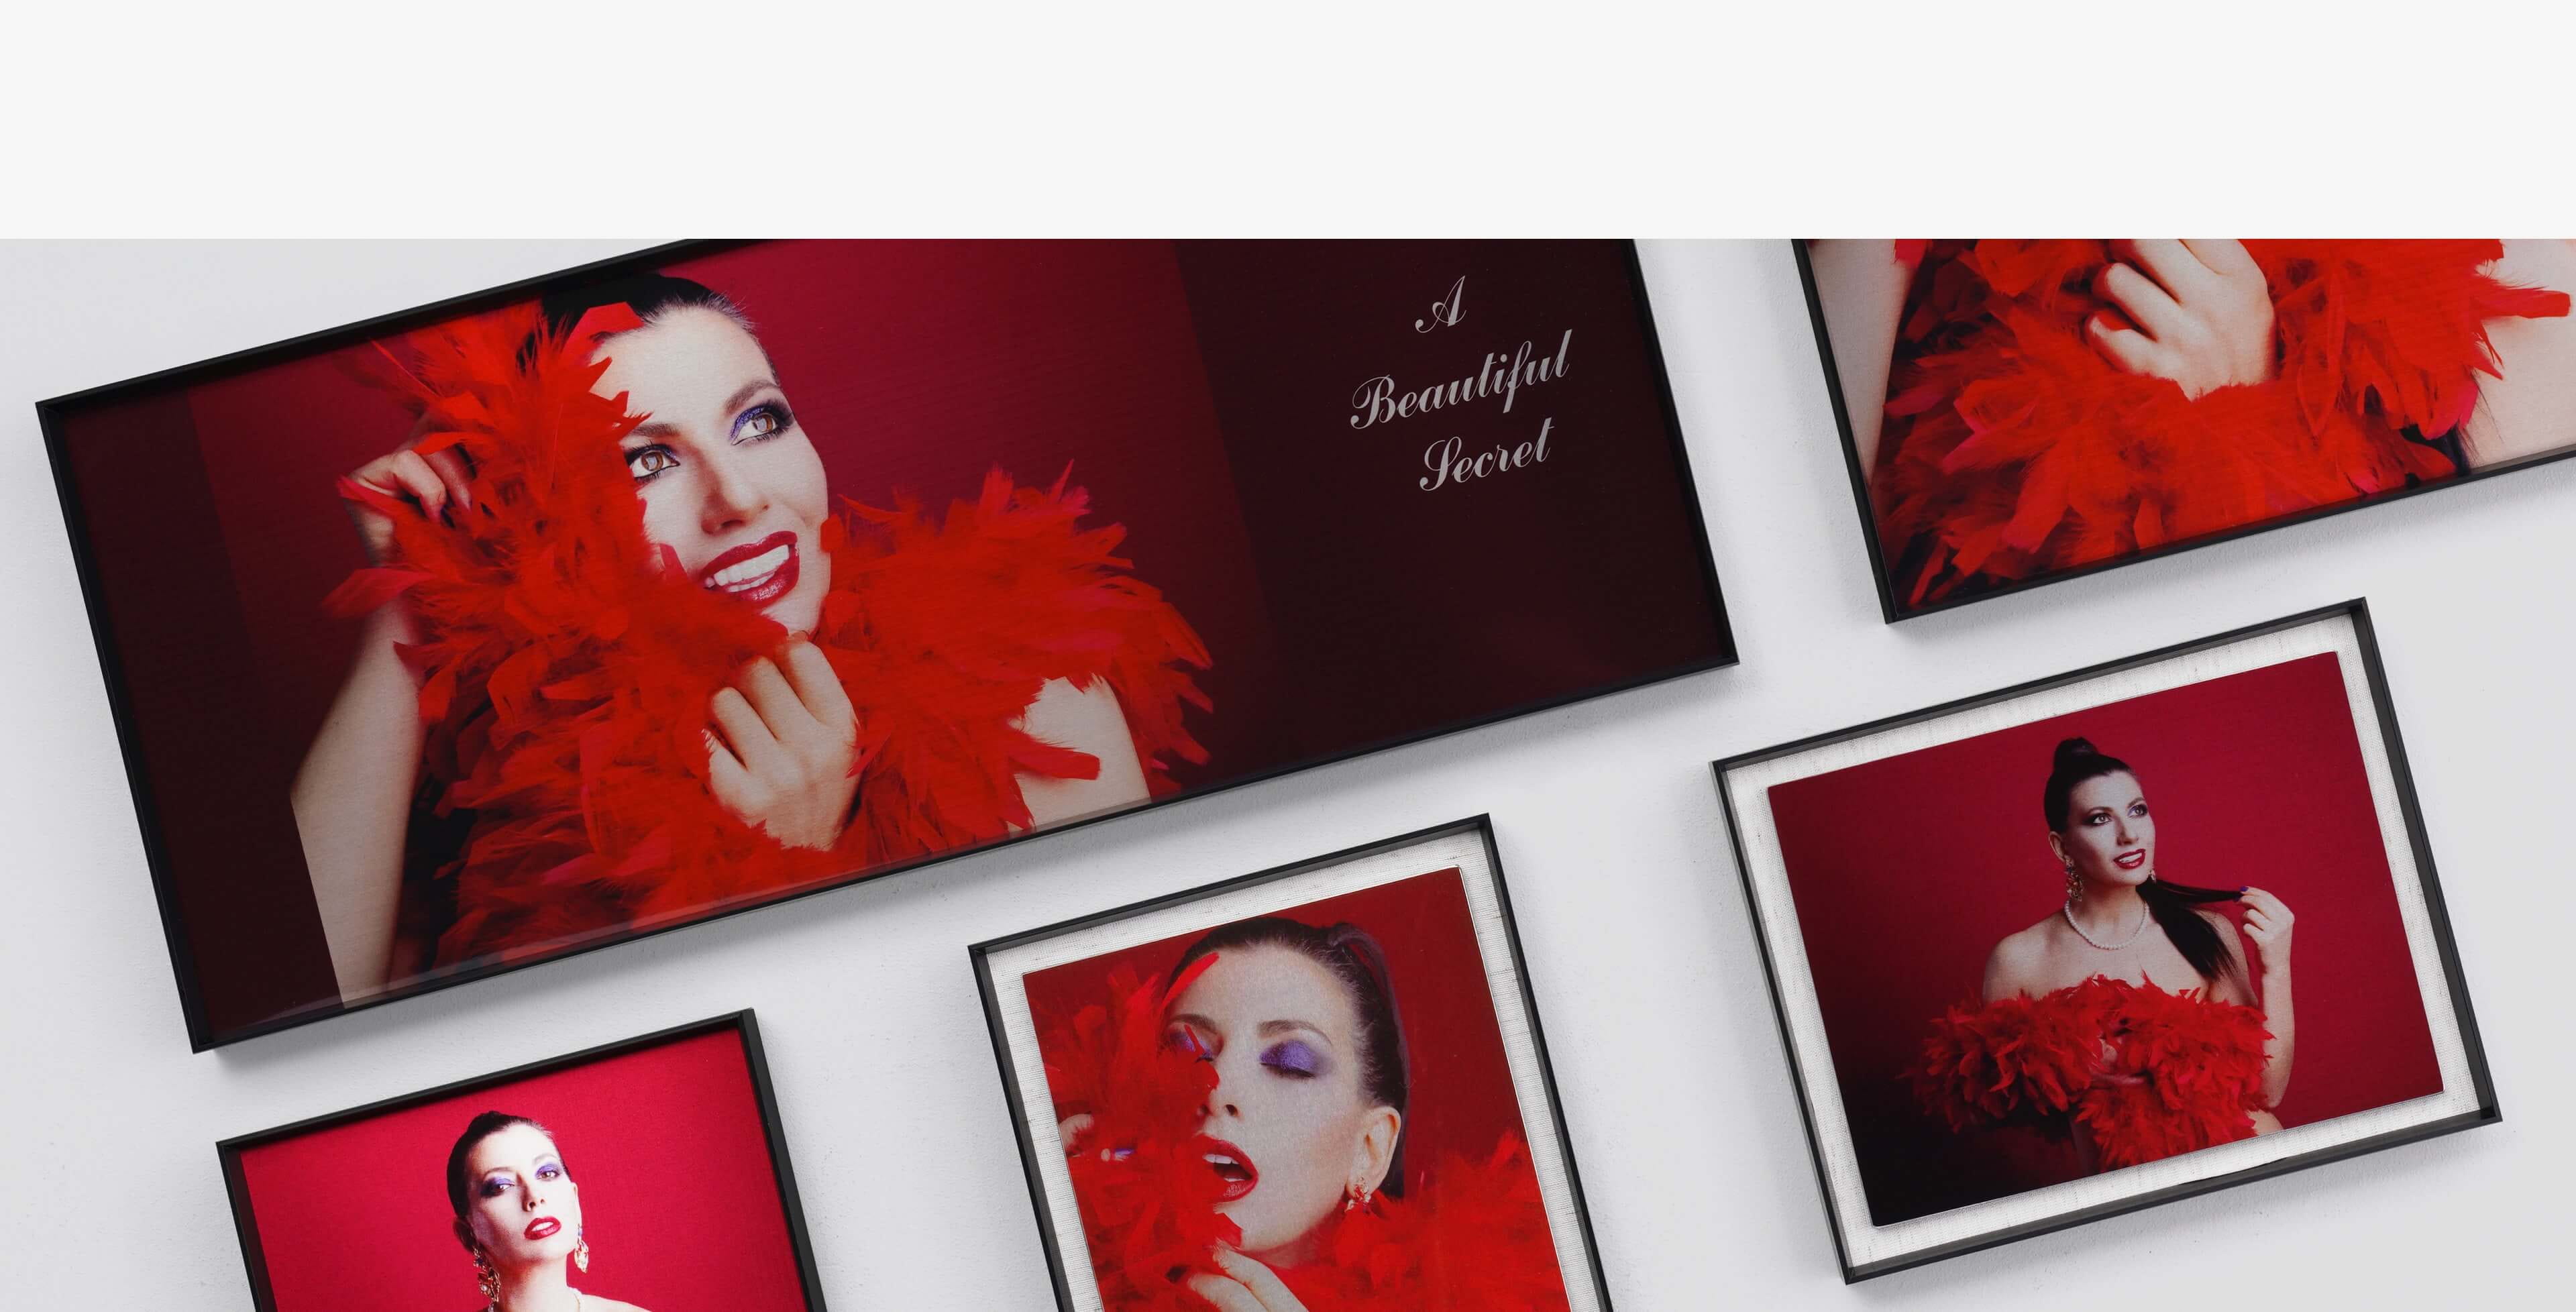 five framed metal prints showing woman with red feather outfit